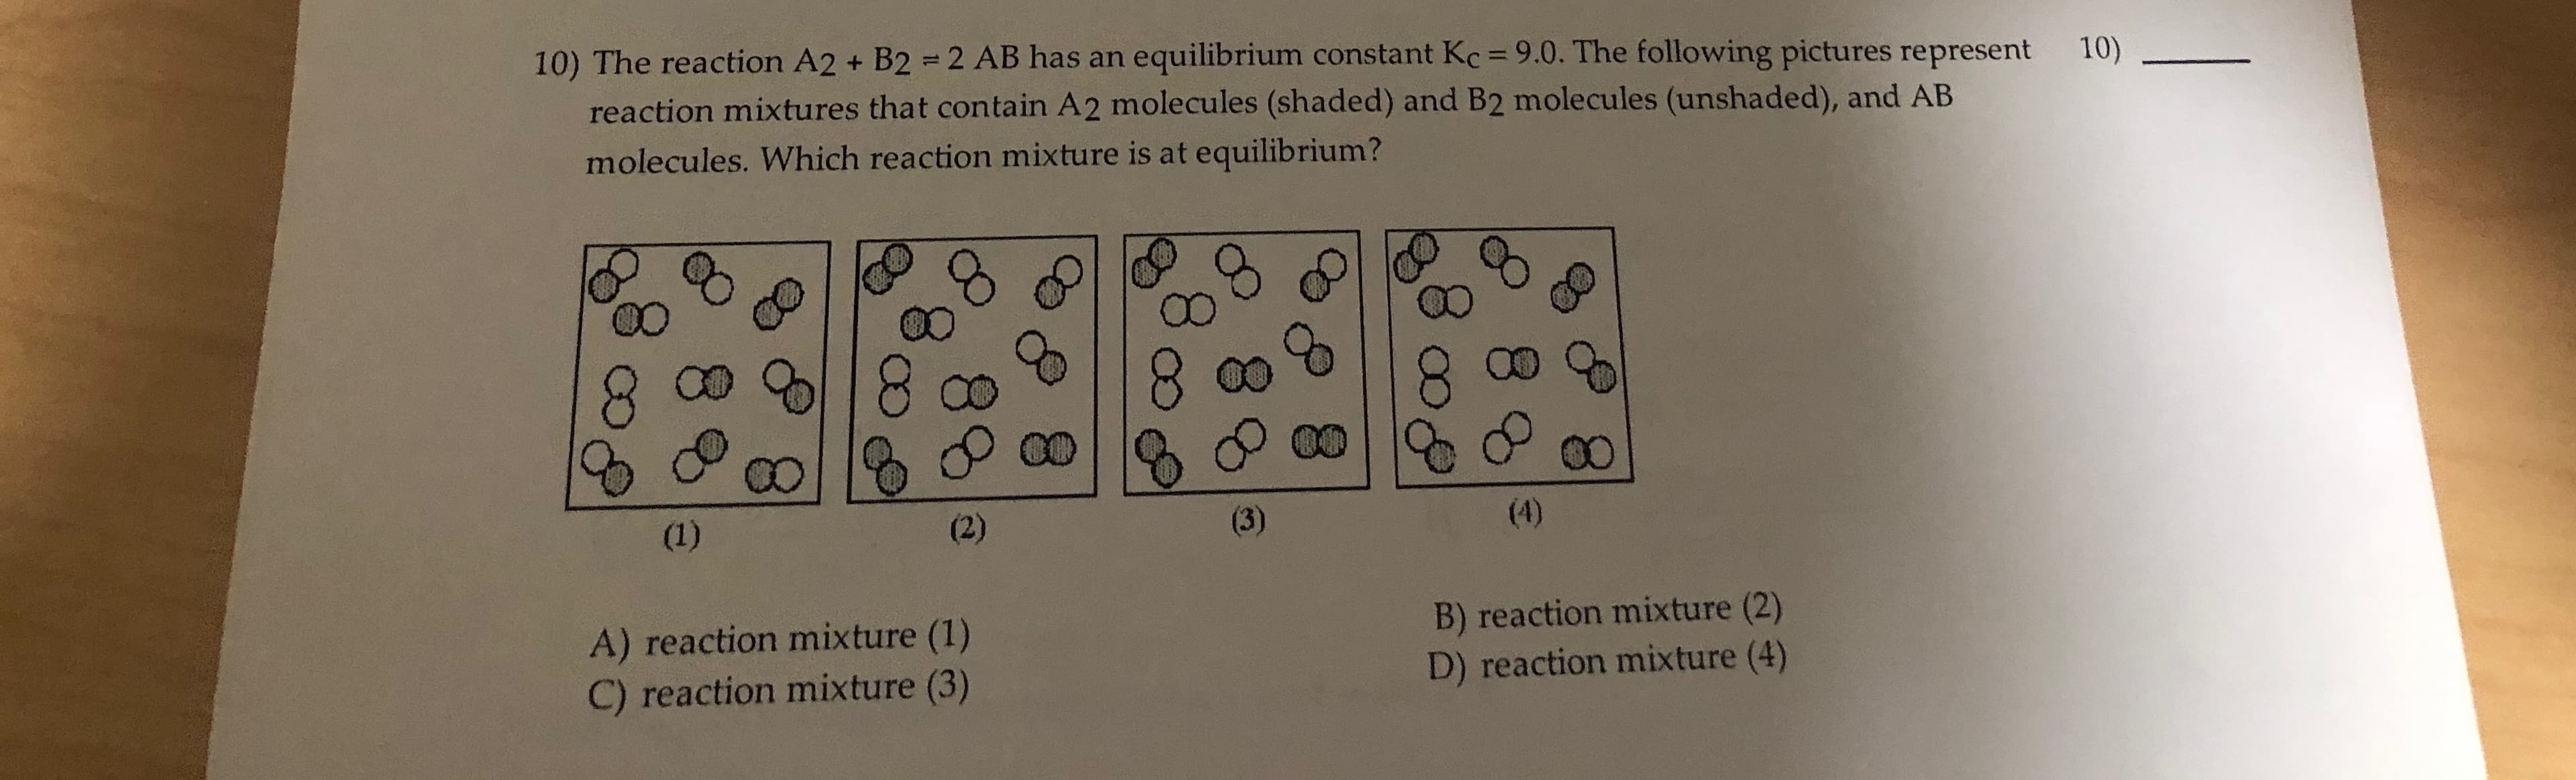 10) The reaction A2 + B2 = 2 AB has an equilibrium constant Kc = 9.0. The following pictures represent
%3D
10)
reaction mixtures that contain A2 molecules (shaded) and B2 molecules (unshaded), and AB
molecules. Which reaction mixture is at equilibrium?
8.
00
(1)
(2)
(3)
(4)
A) reaction mixture (1)
C) reaction mixture (3)
B) reaction mixture (2)
D) reaction mixture (4)
